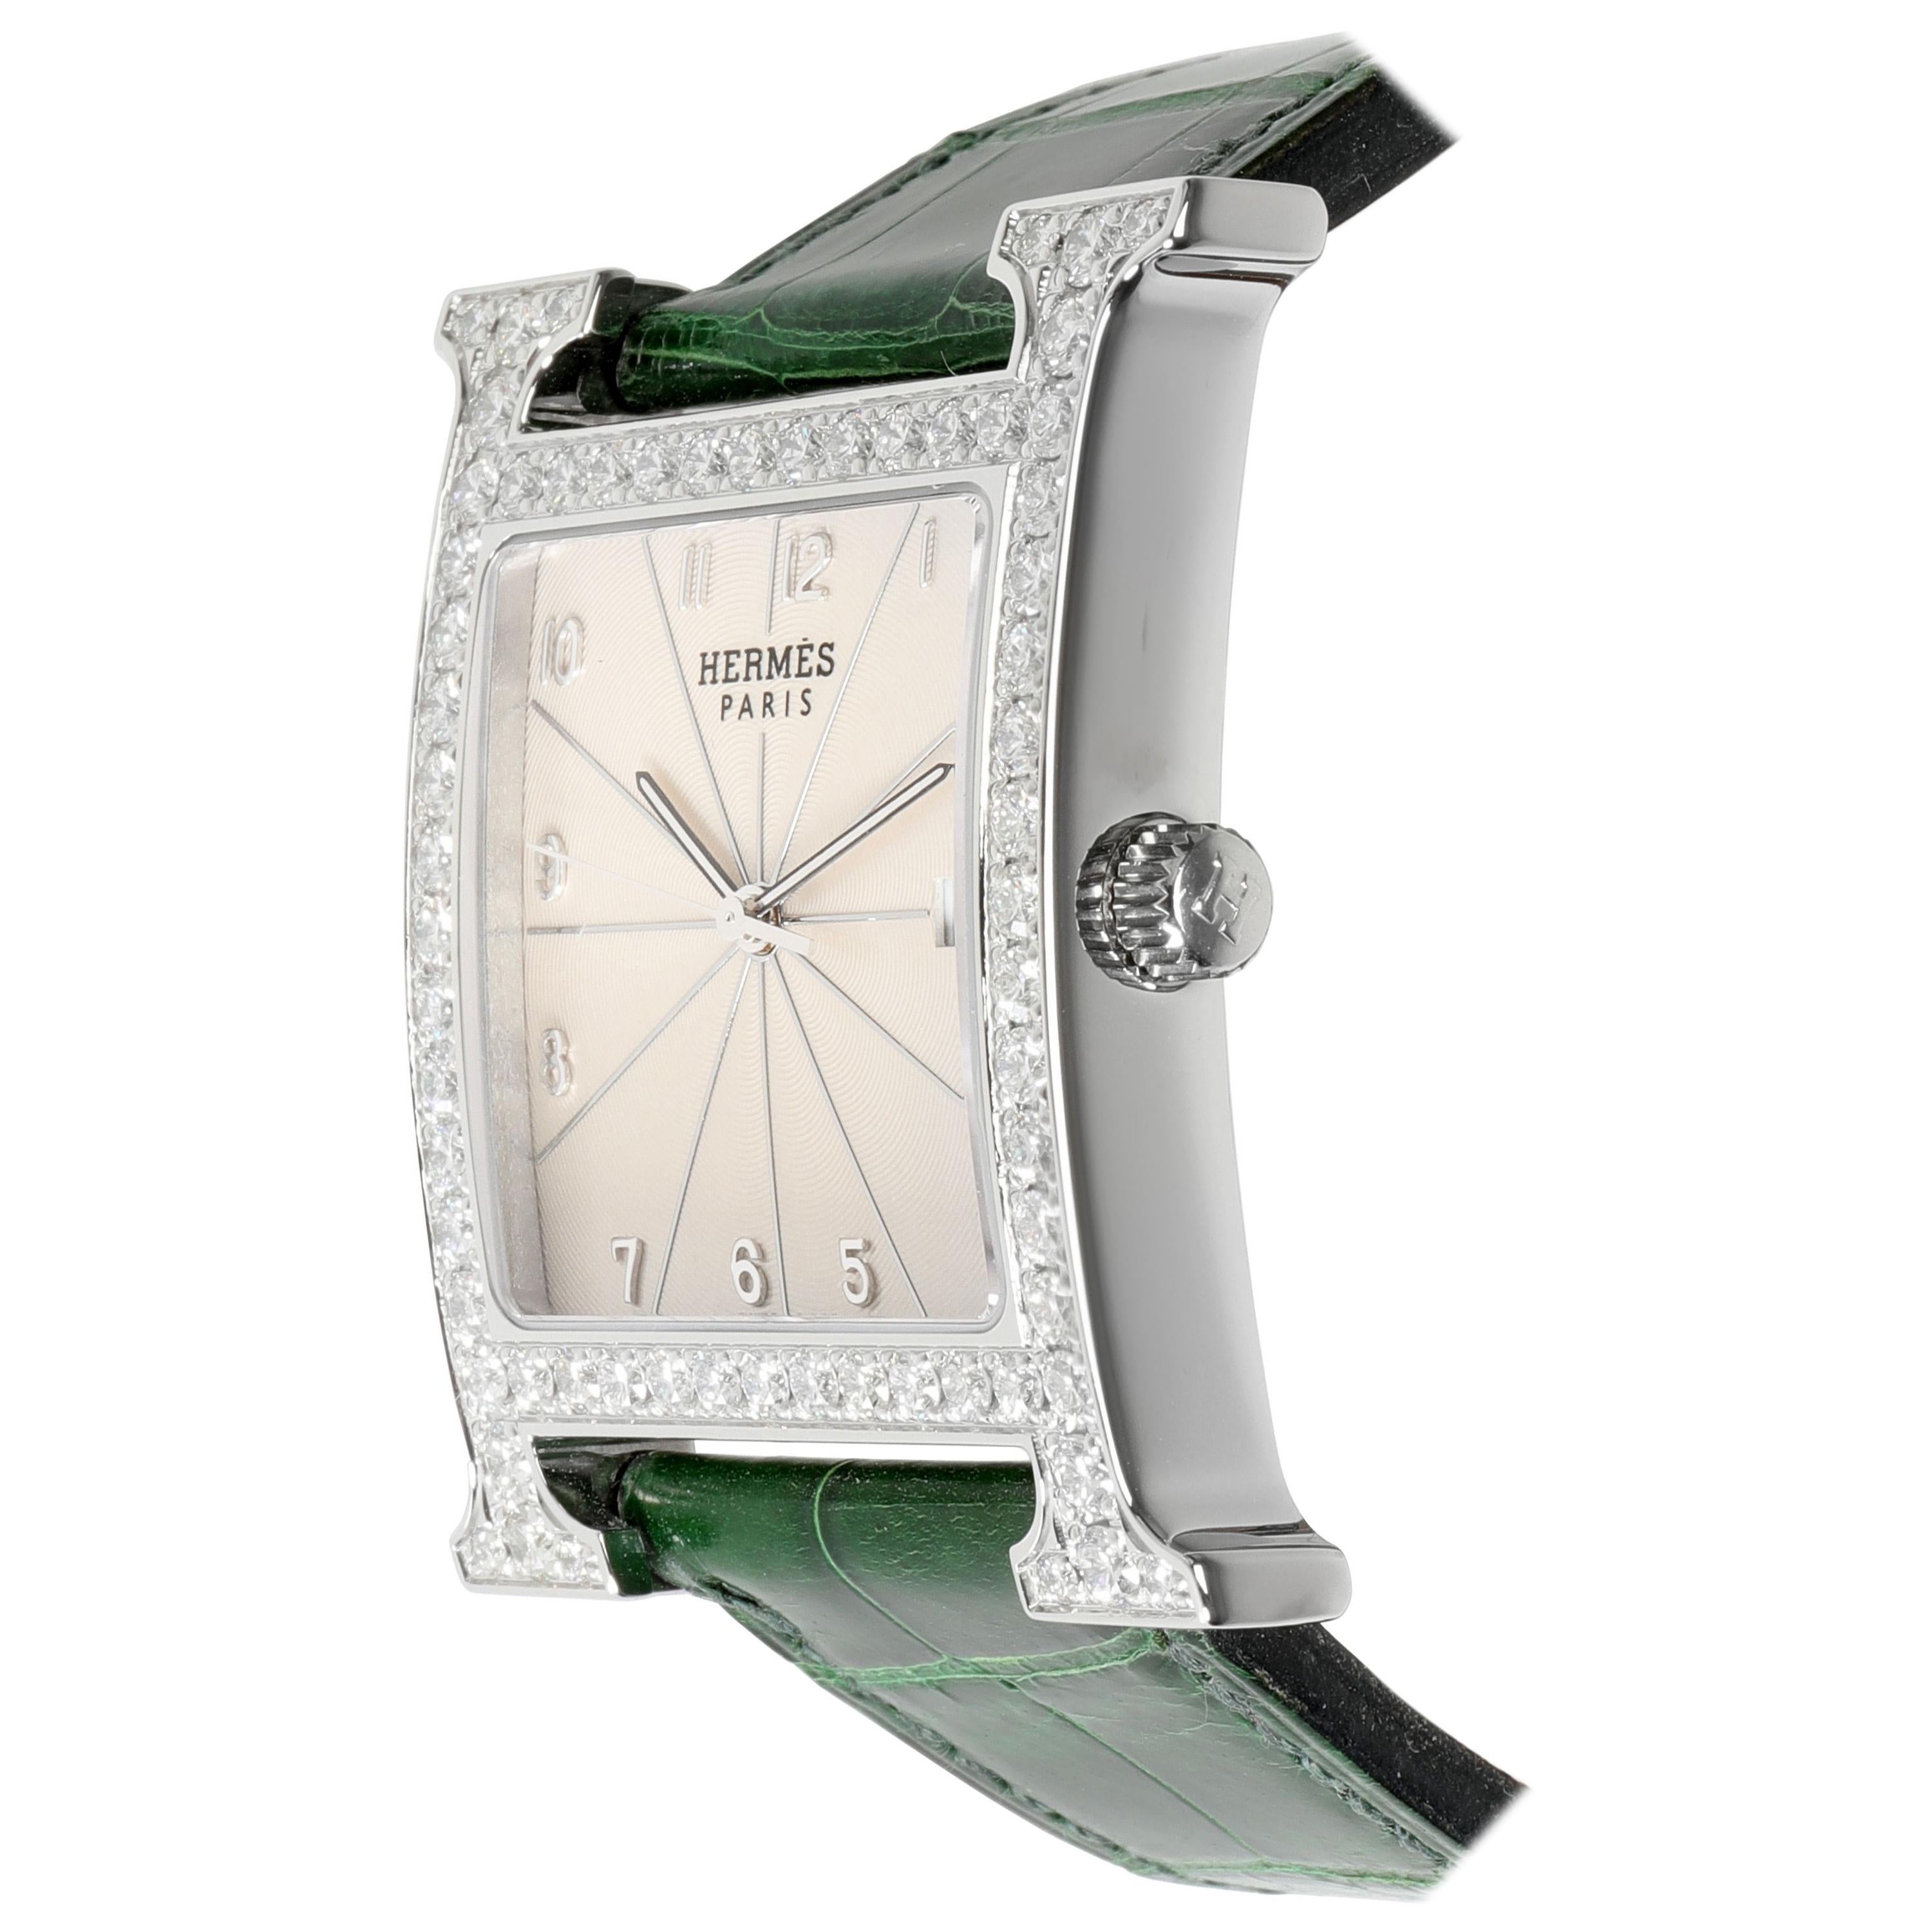 Hermès Heure H HH1-830 Unisex Watch in Stainless Steel